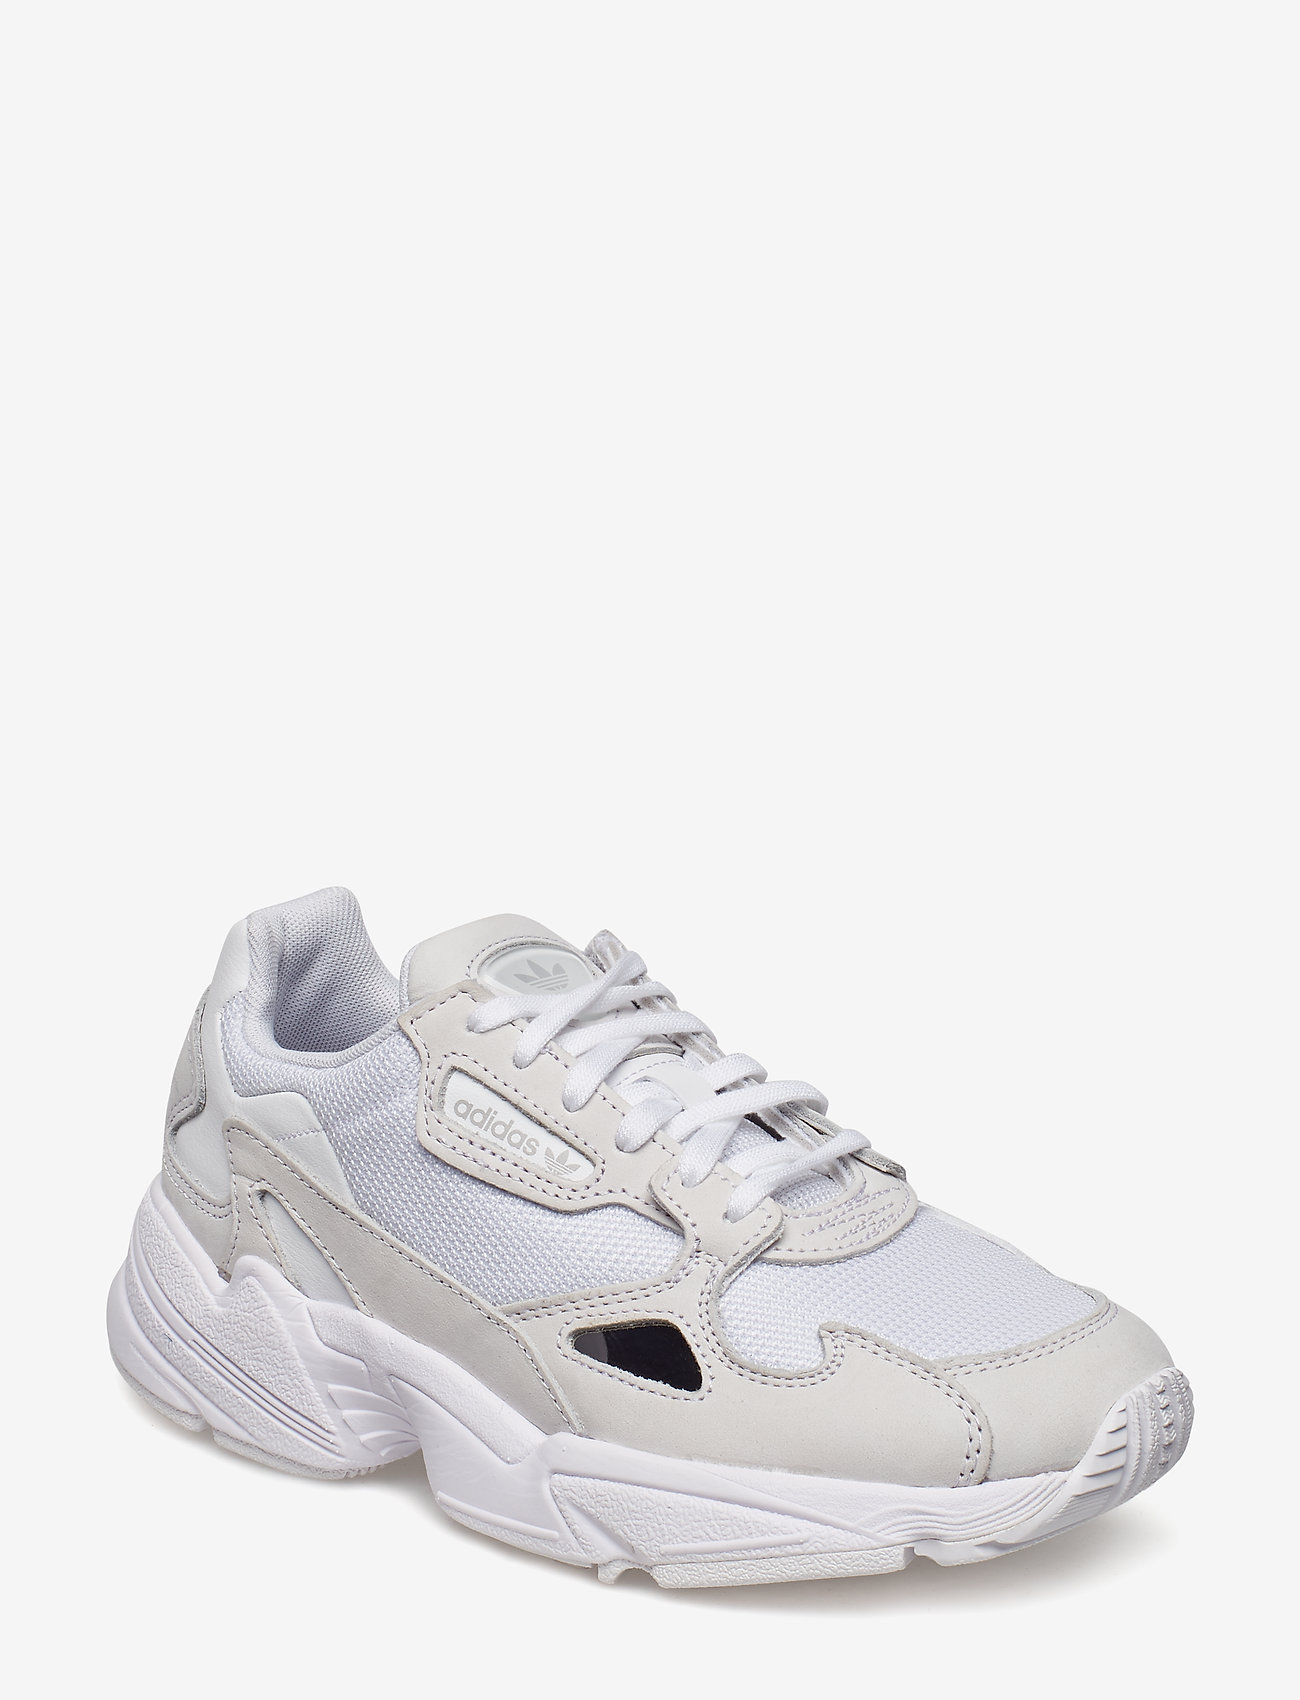 adidas Originals - FALCON W - chunky sneakers - ftwwht/ftwwht/crywht - 0